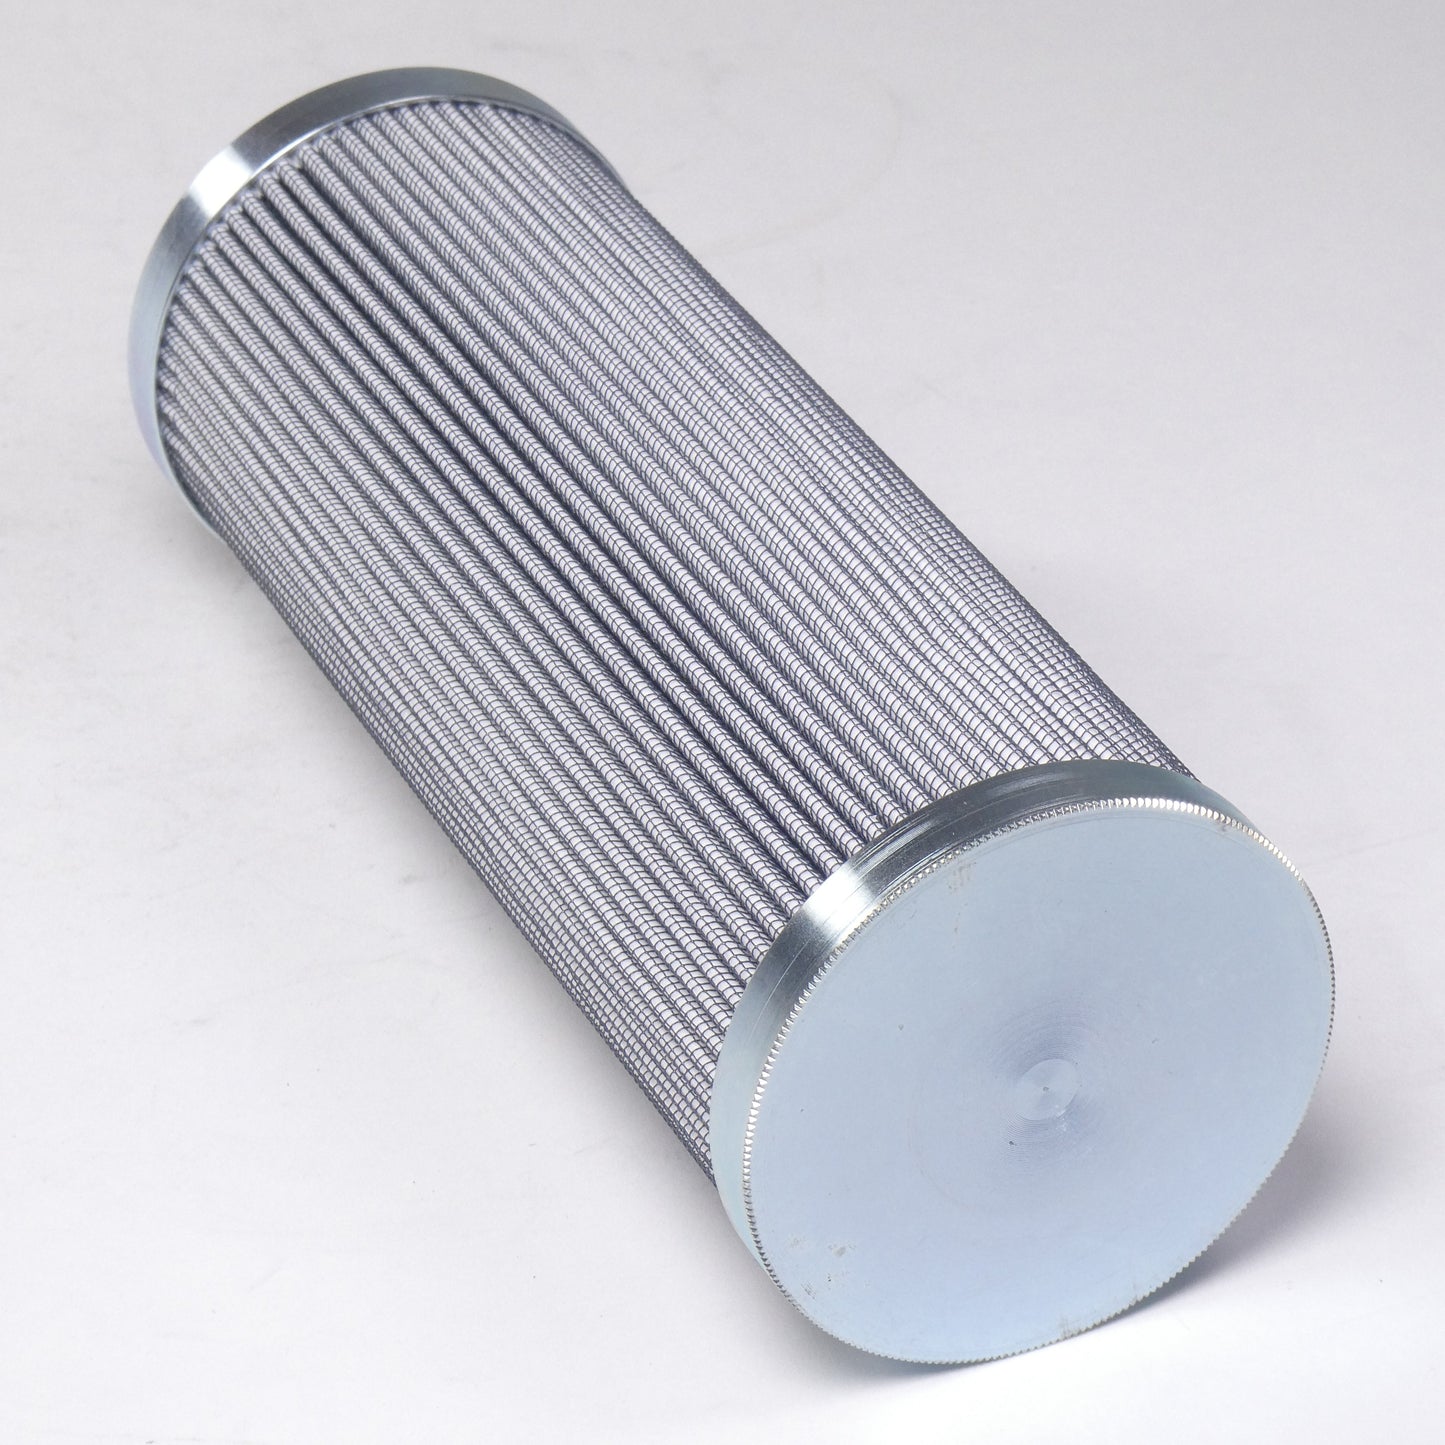 Hydrafil Replacement Filter Element for Pall HC9601FKT8Z